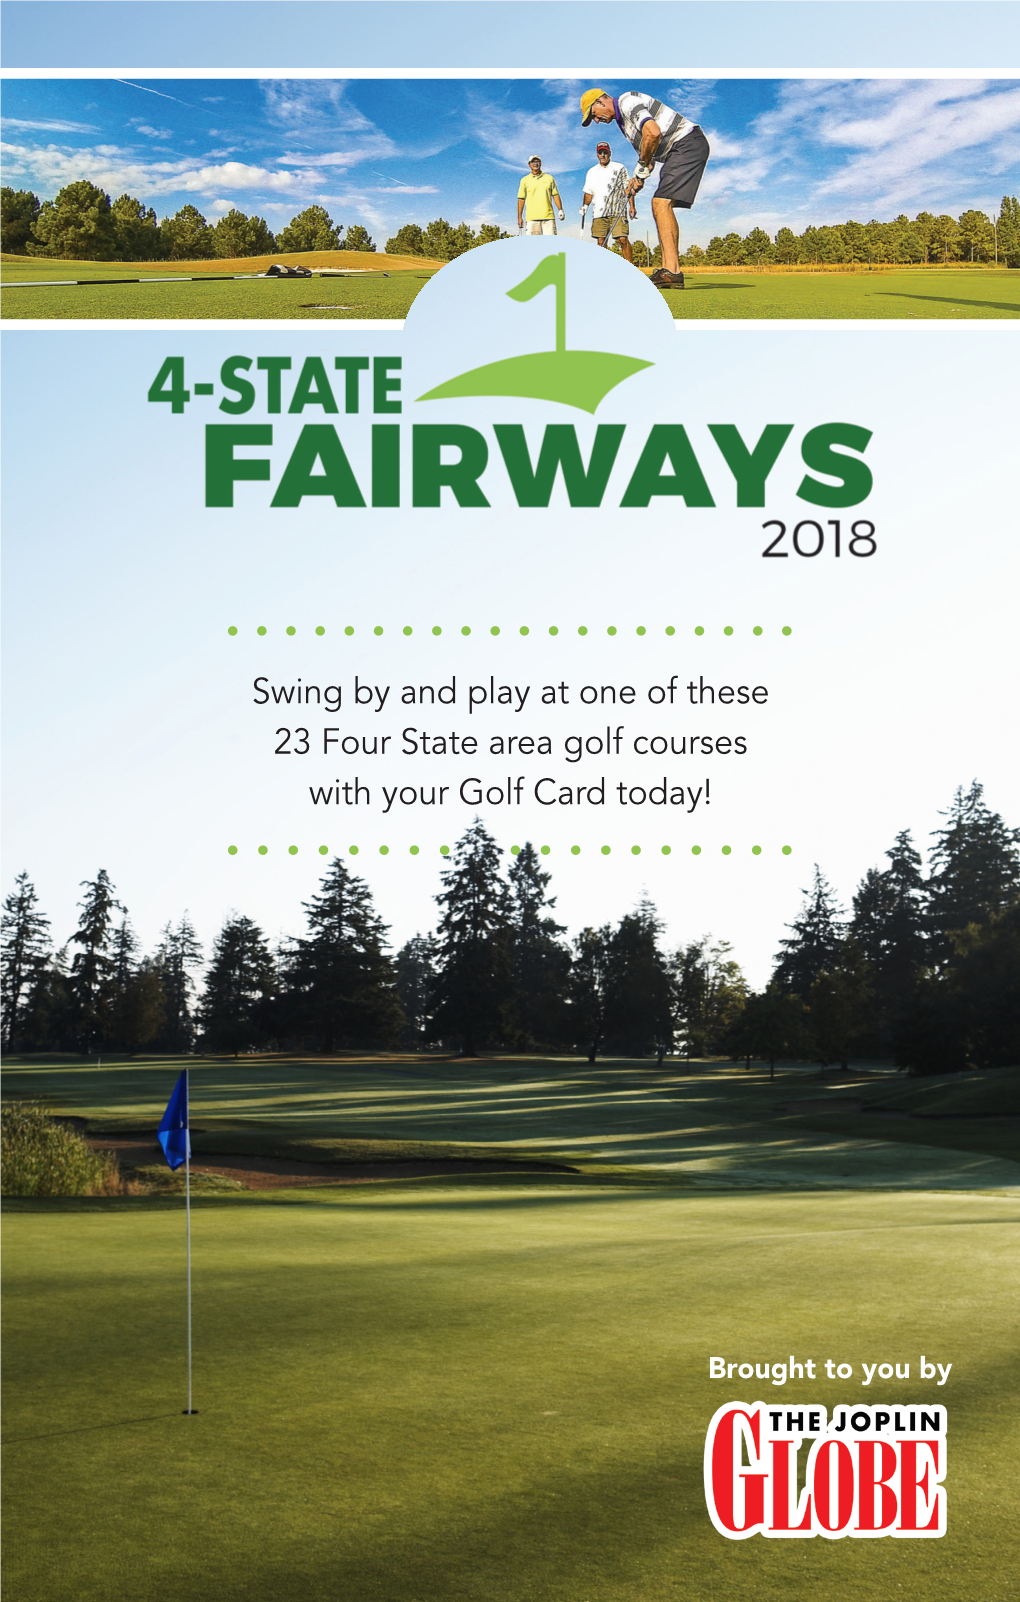 Swing by and Play at One of These 23 Four State Area Golf Courses with Your Golf Card Today!